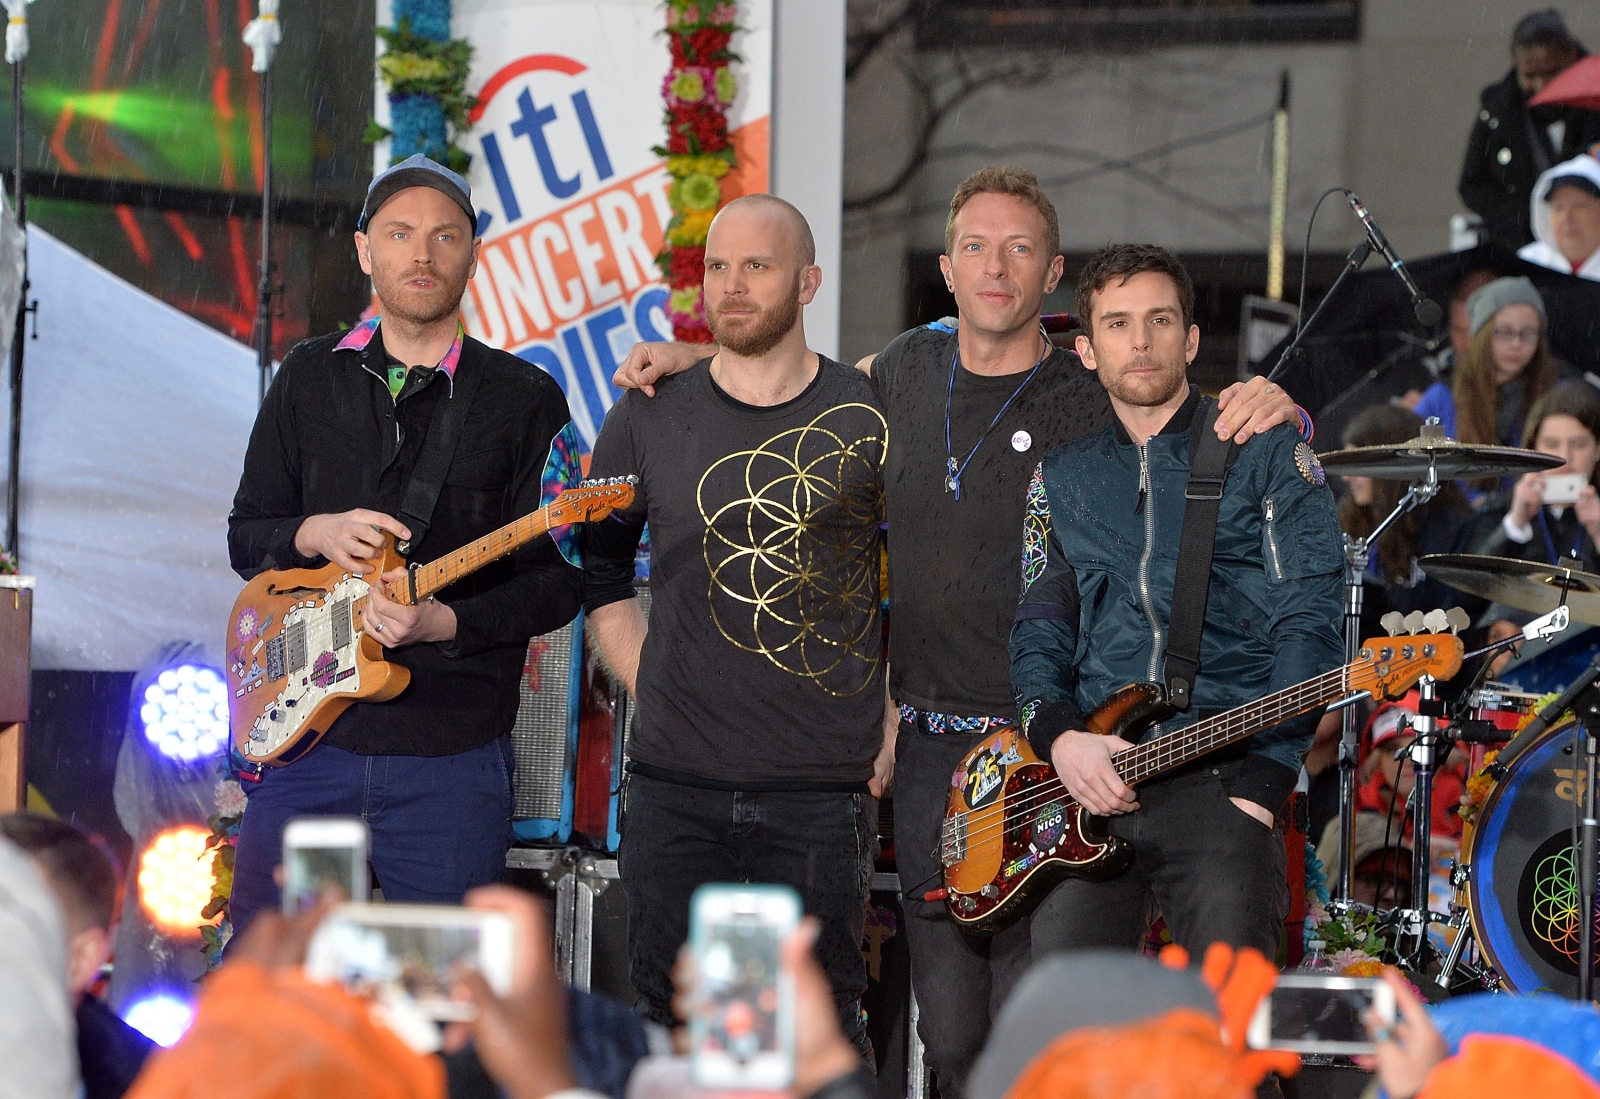 Glastonbury 2016: Will headliners Coldplay hold fans' interest if they stop releasing ...